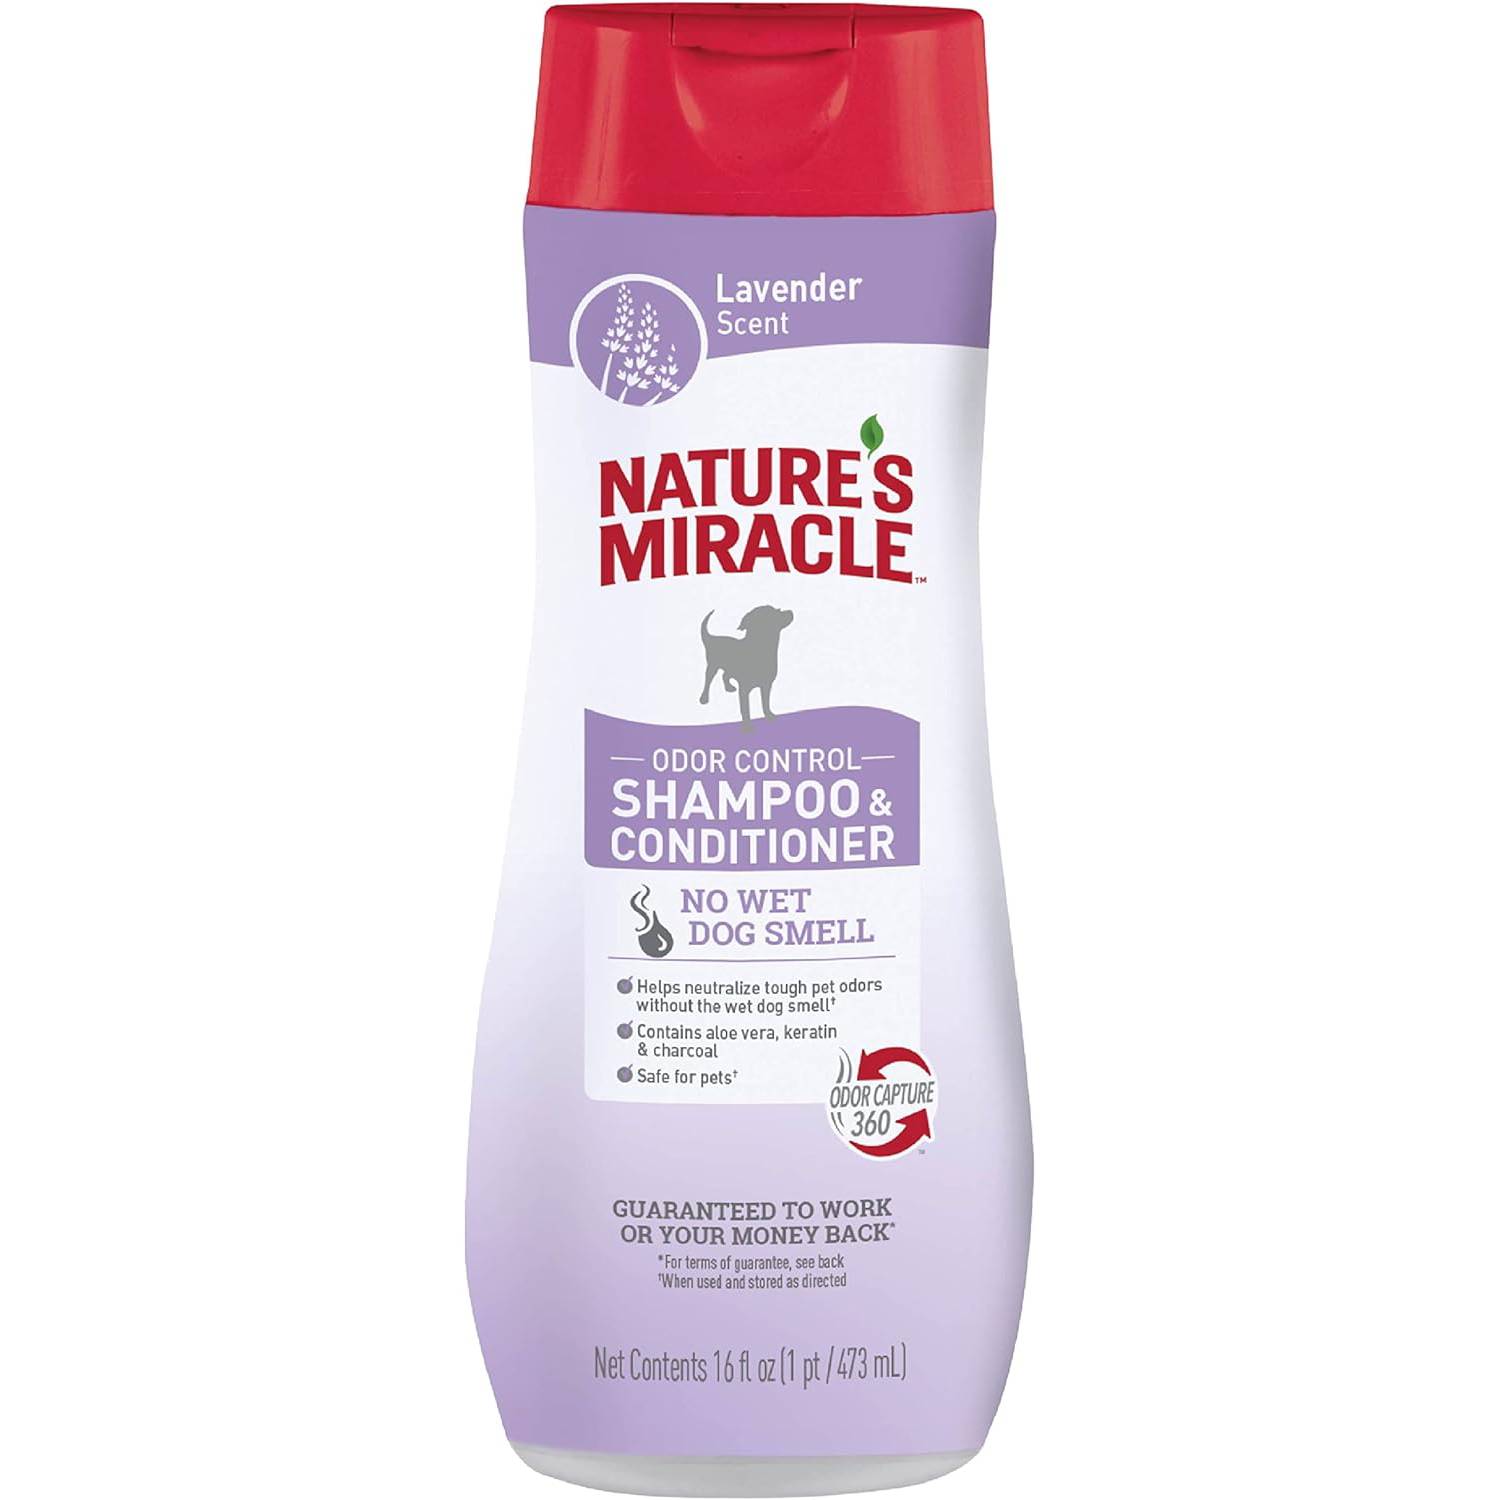 Nature's Miracle Nature's Miracle Odor Control Shampoo & Conditioner